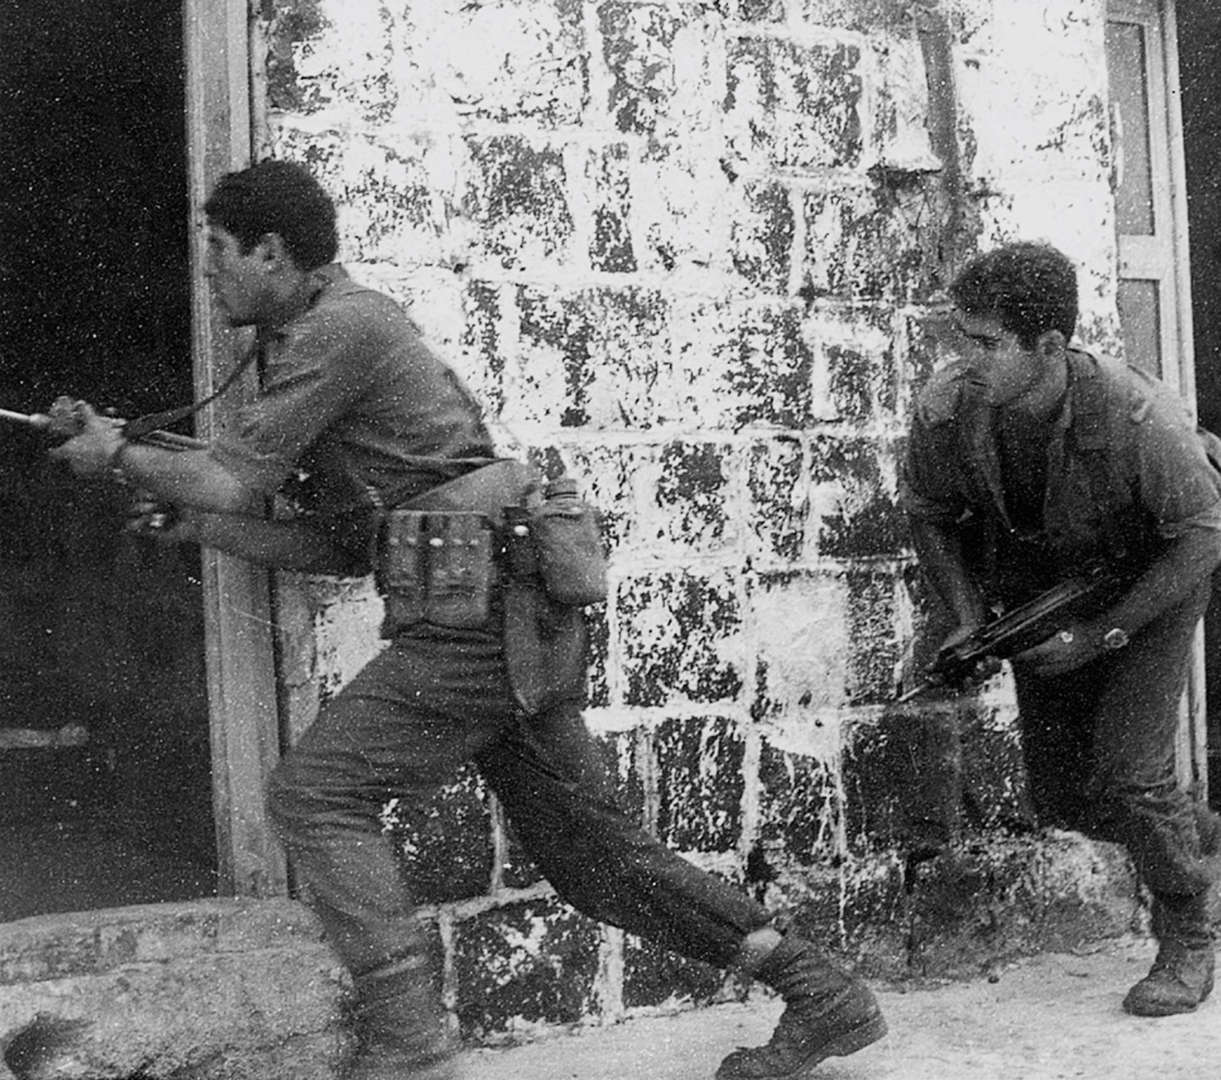 ISRAEL - NOVEMBER 1, 1971: (ISRAEL OUT) This Israeli Government Press Office (GPO) file photo first made available on November 1, 1971 shows Benjamin Netanyahu (R) during a training exercise as a member of the Israeli army's elite Sayeret Matkal commando unit. Netanyahu, who is the leader of the conservative Likud party, has a growing lead in the race to become Israel's next Prime Minister. The politician and former special forces soldier has already served as Israel's Prime Minister, from 1996 to 1999. (Photo by